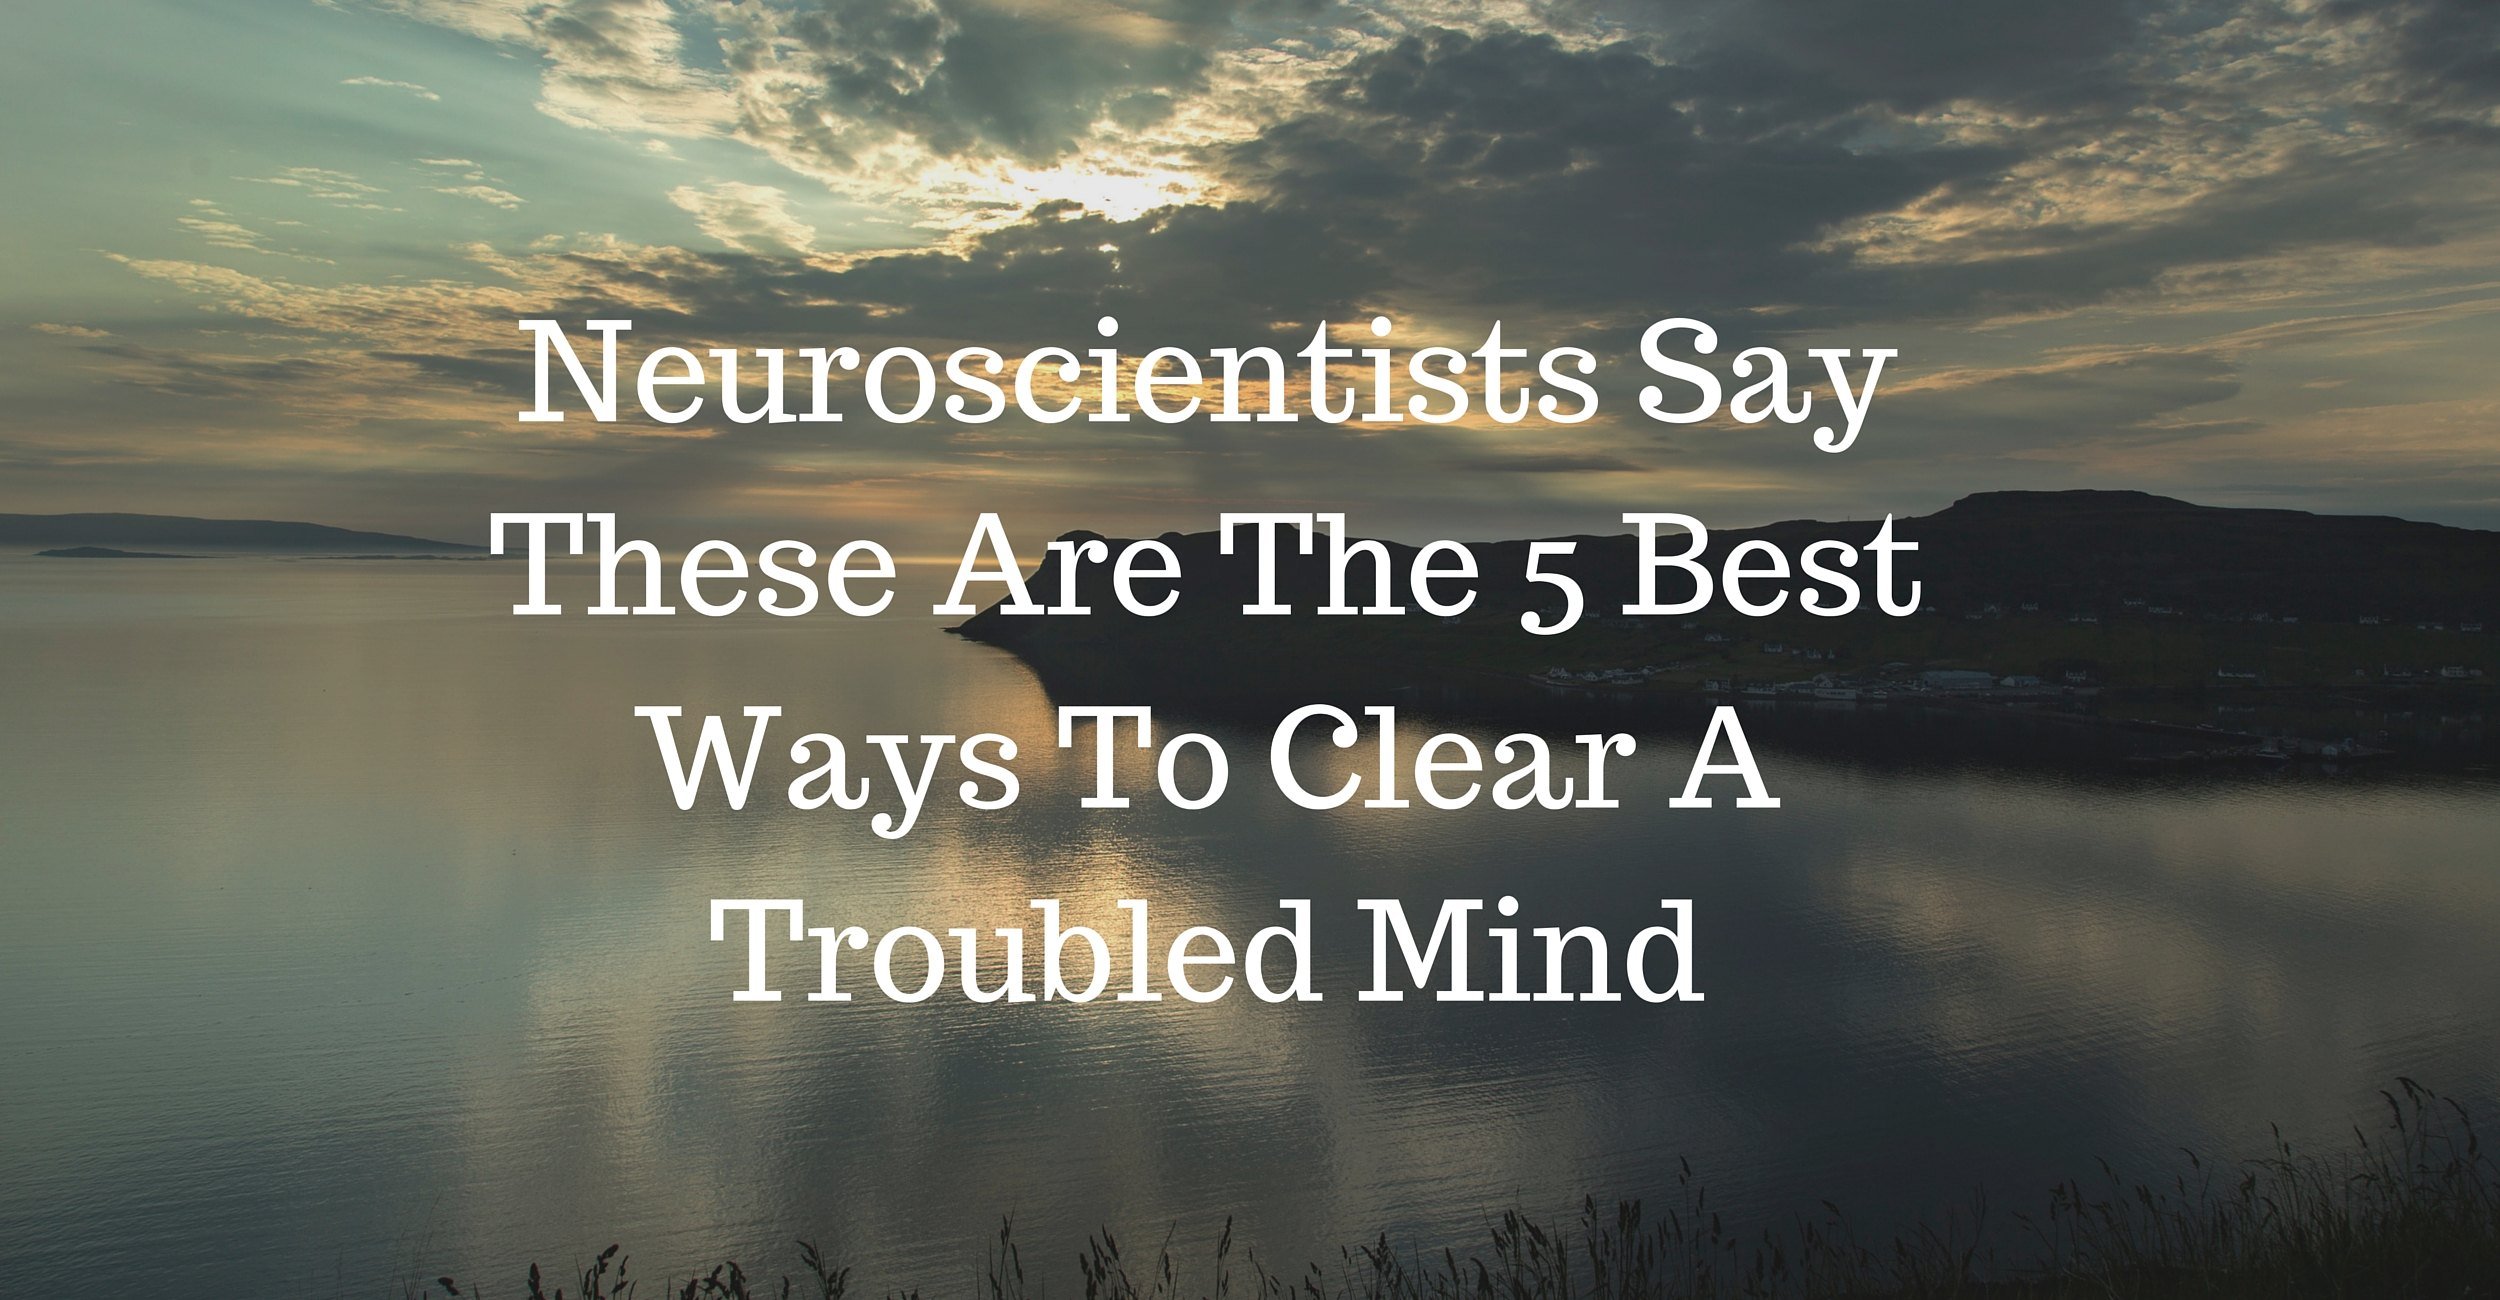 Neuroscientists Say These Are The 5 Best Ways to Clear A Troubled Mind